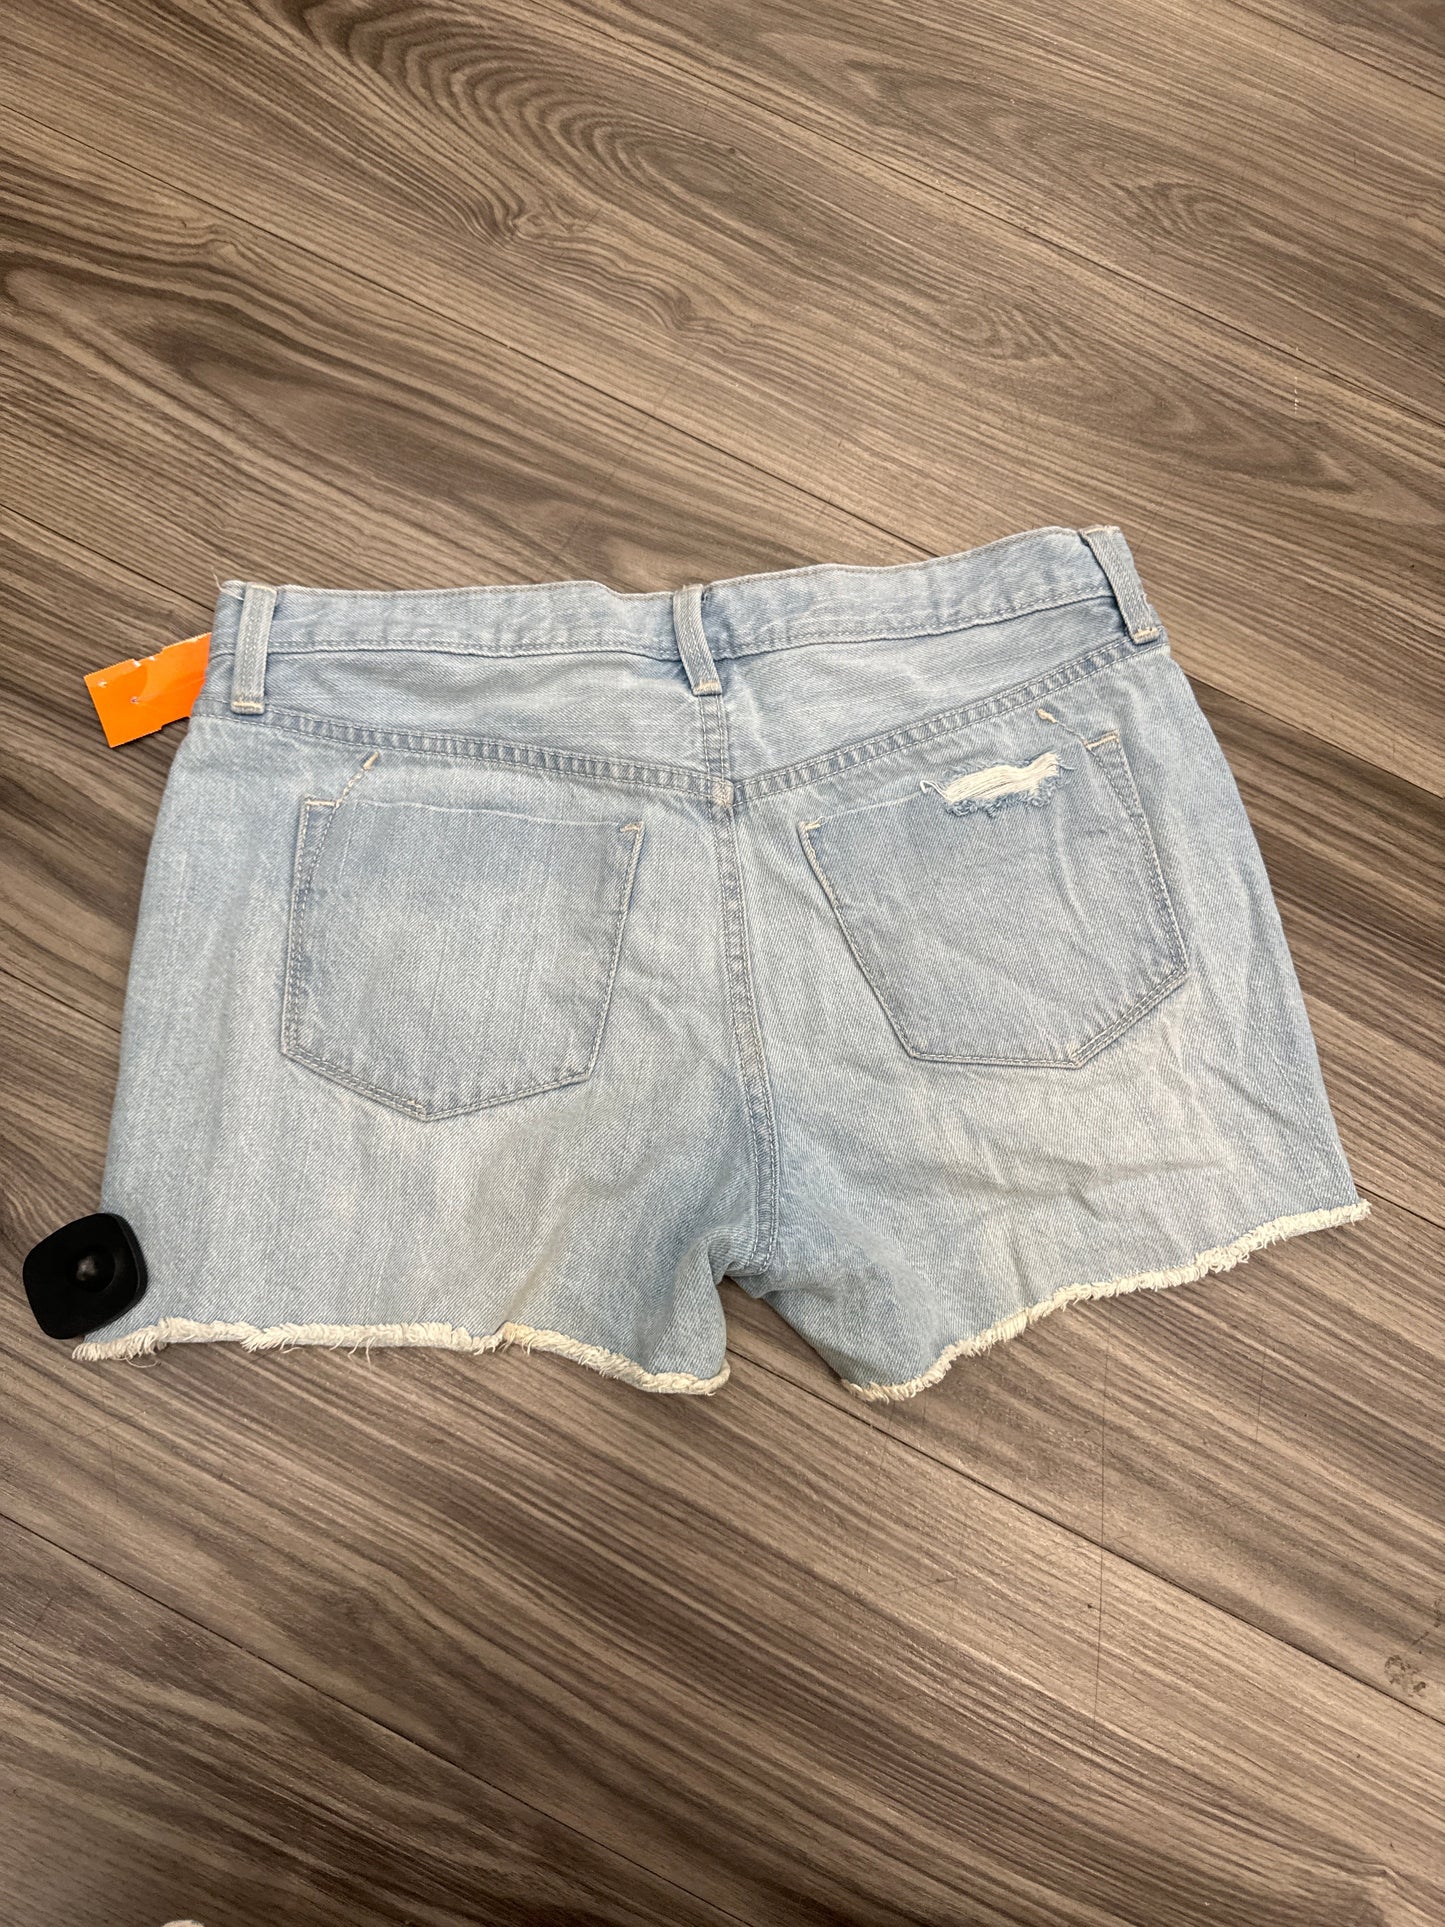 Shorts By Mossimo  Size: 4